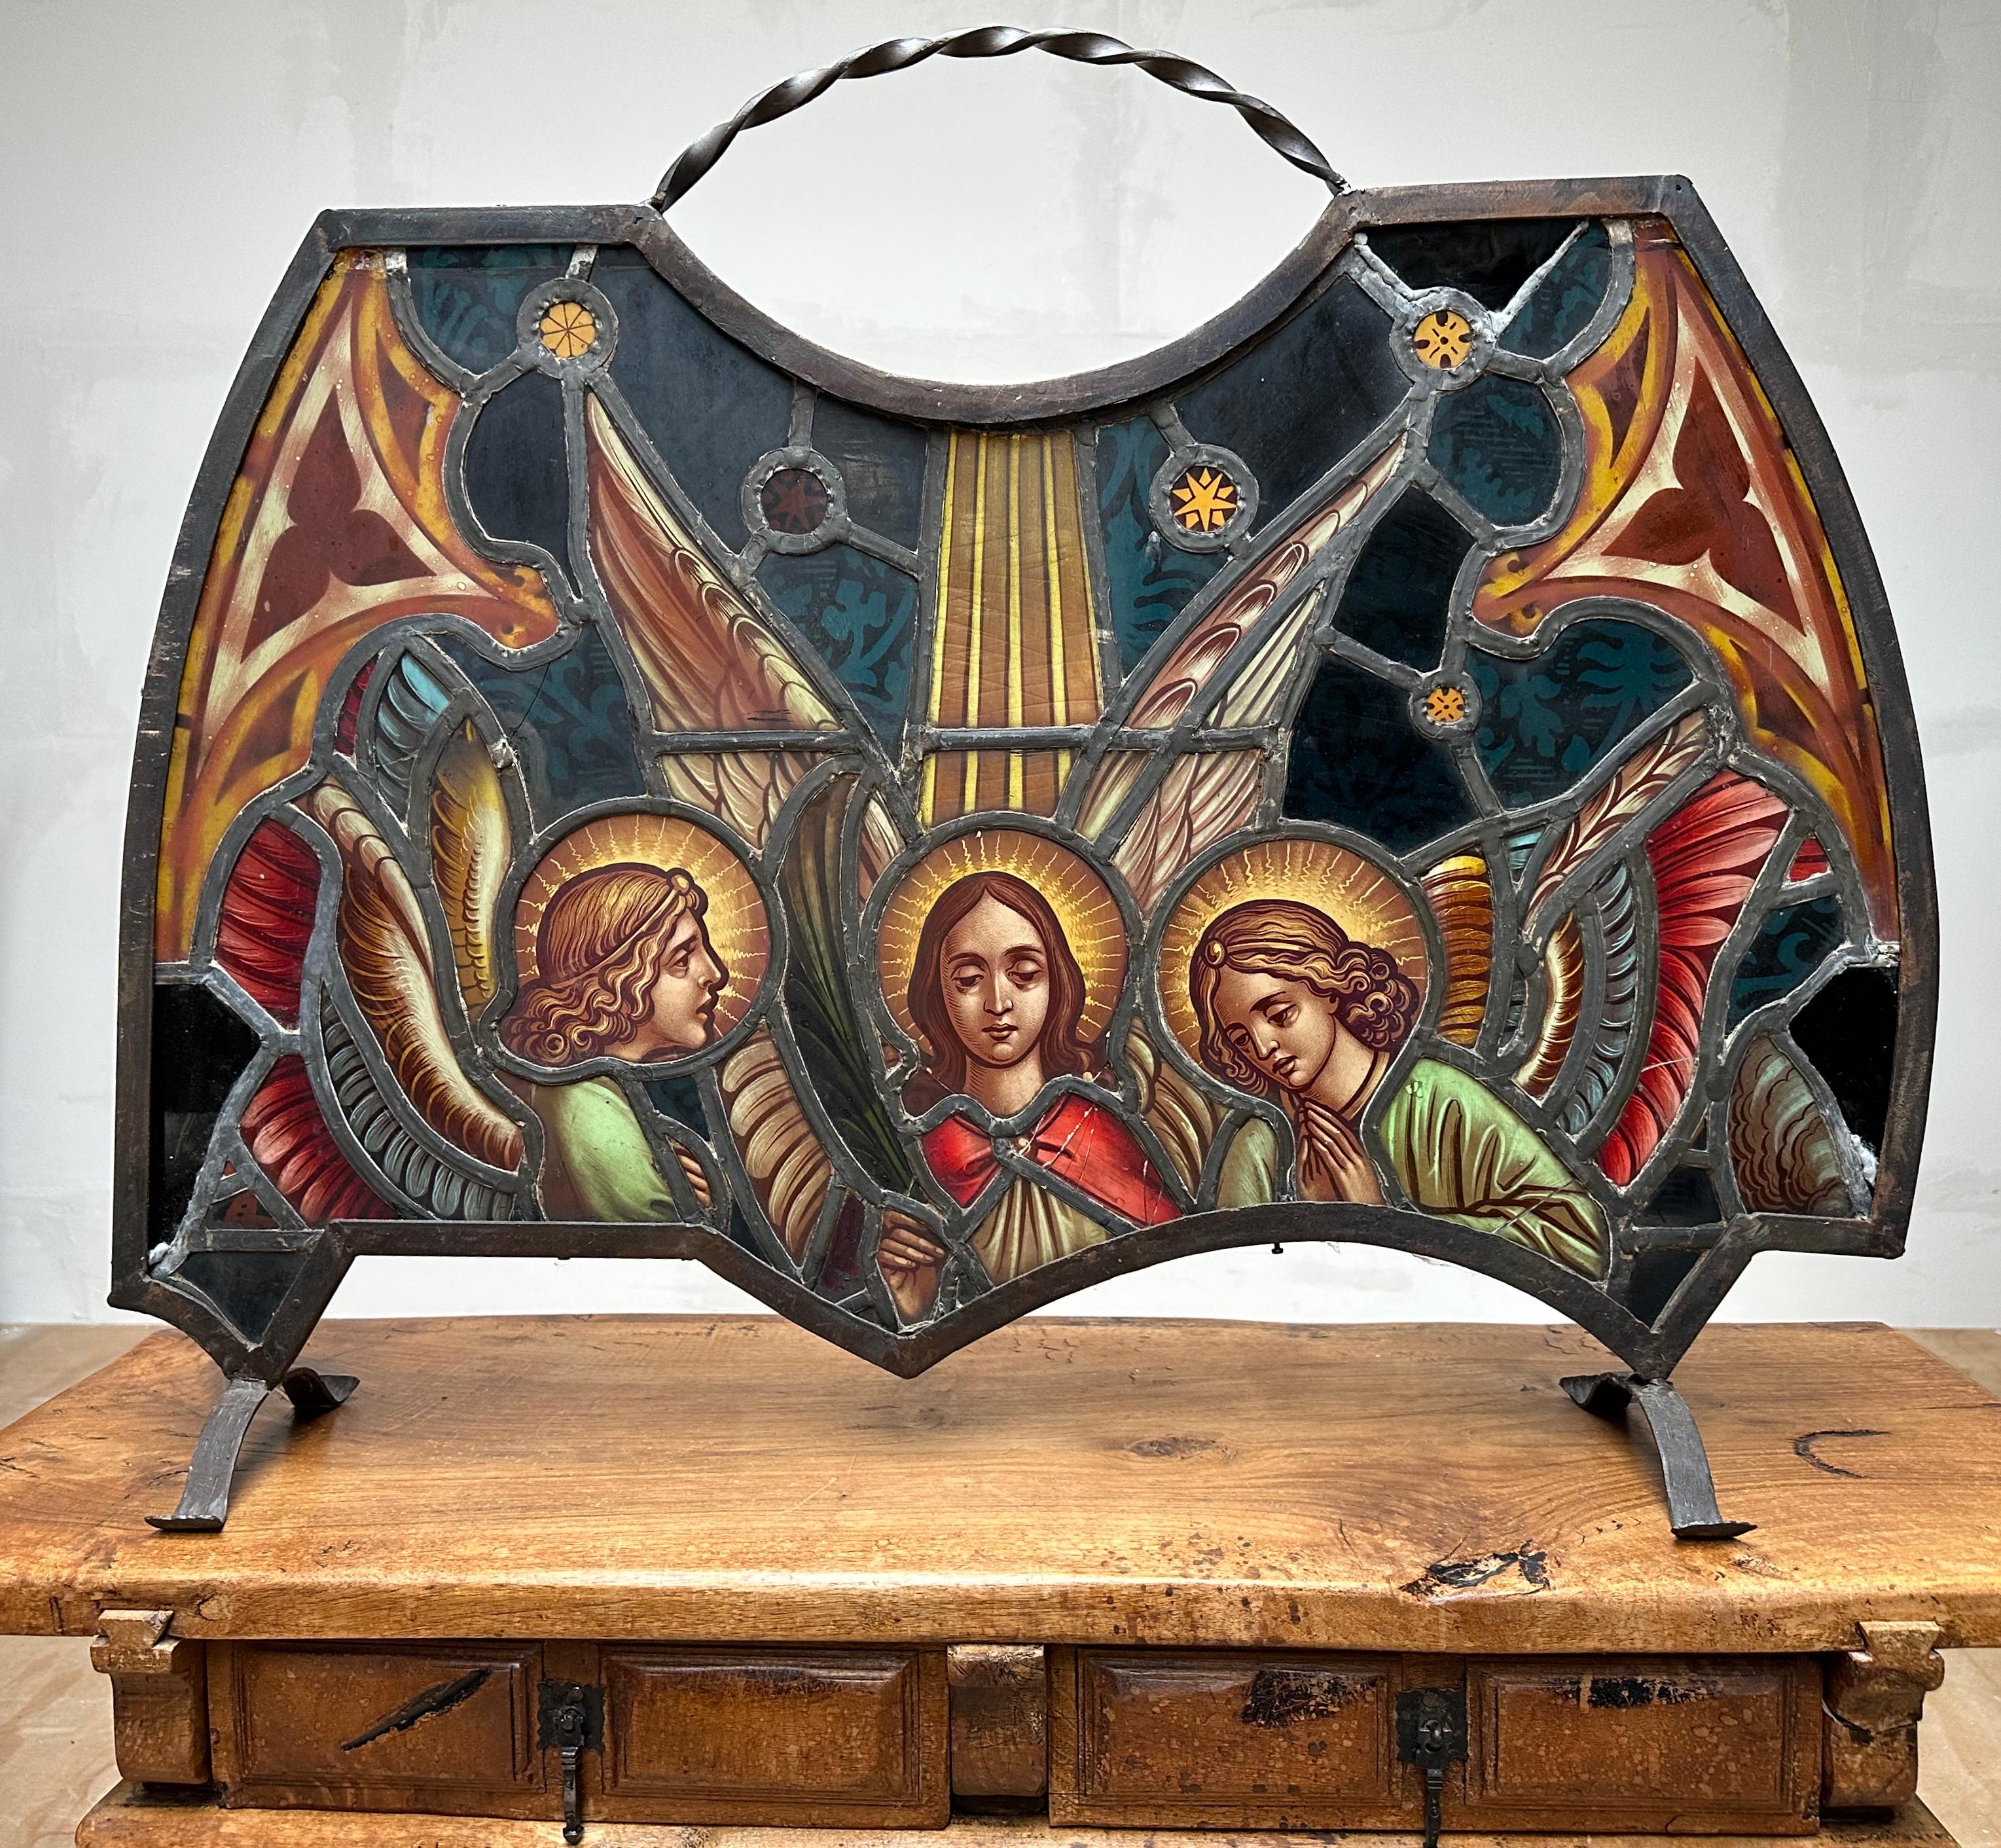 Stunning antique work-of-art-firescreen with (arch) angels in great colors.

This all handcrafted firescreen from the early 1900s definitely is a one of a kind antique. Especially in this hasty, modern era more and more people are starting to